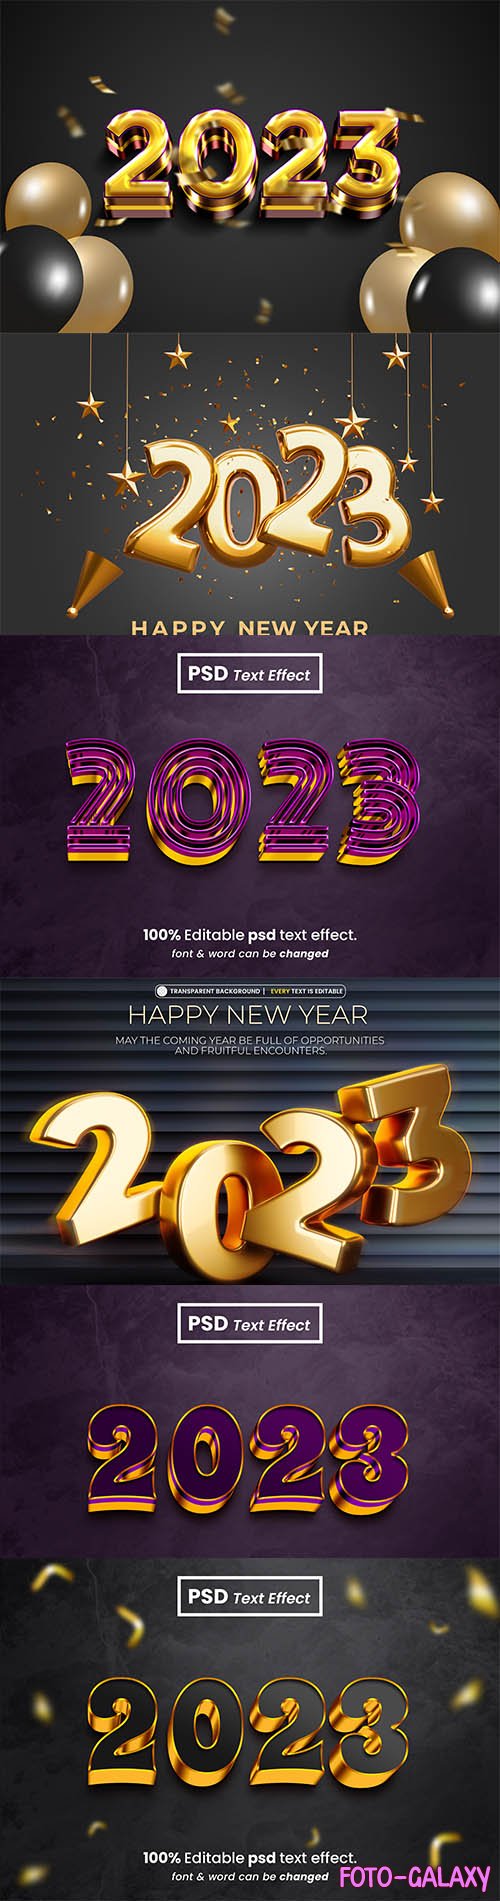 2023 new year gold 3d editable psd text effect